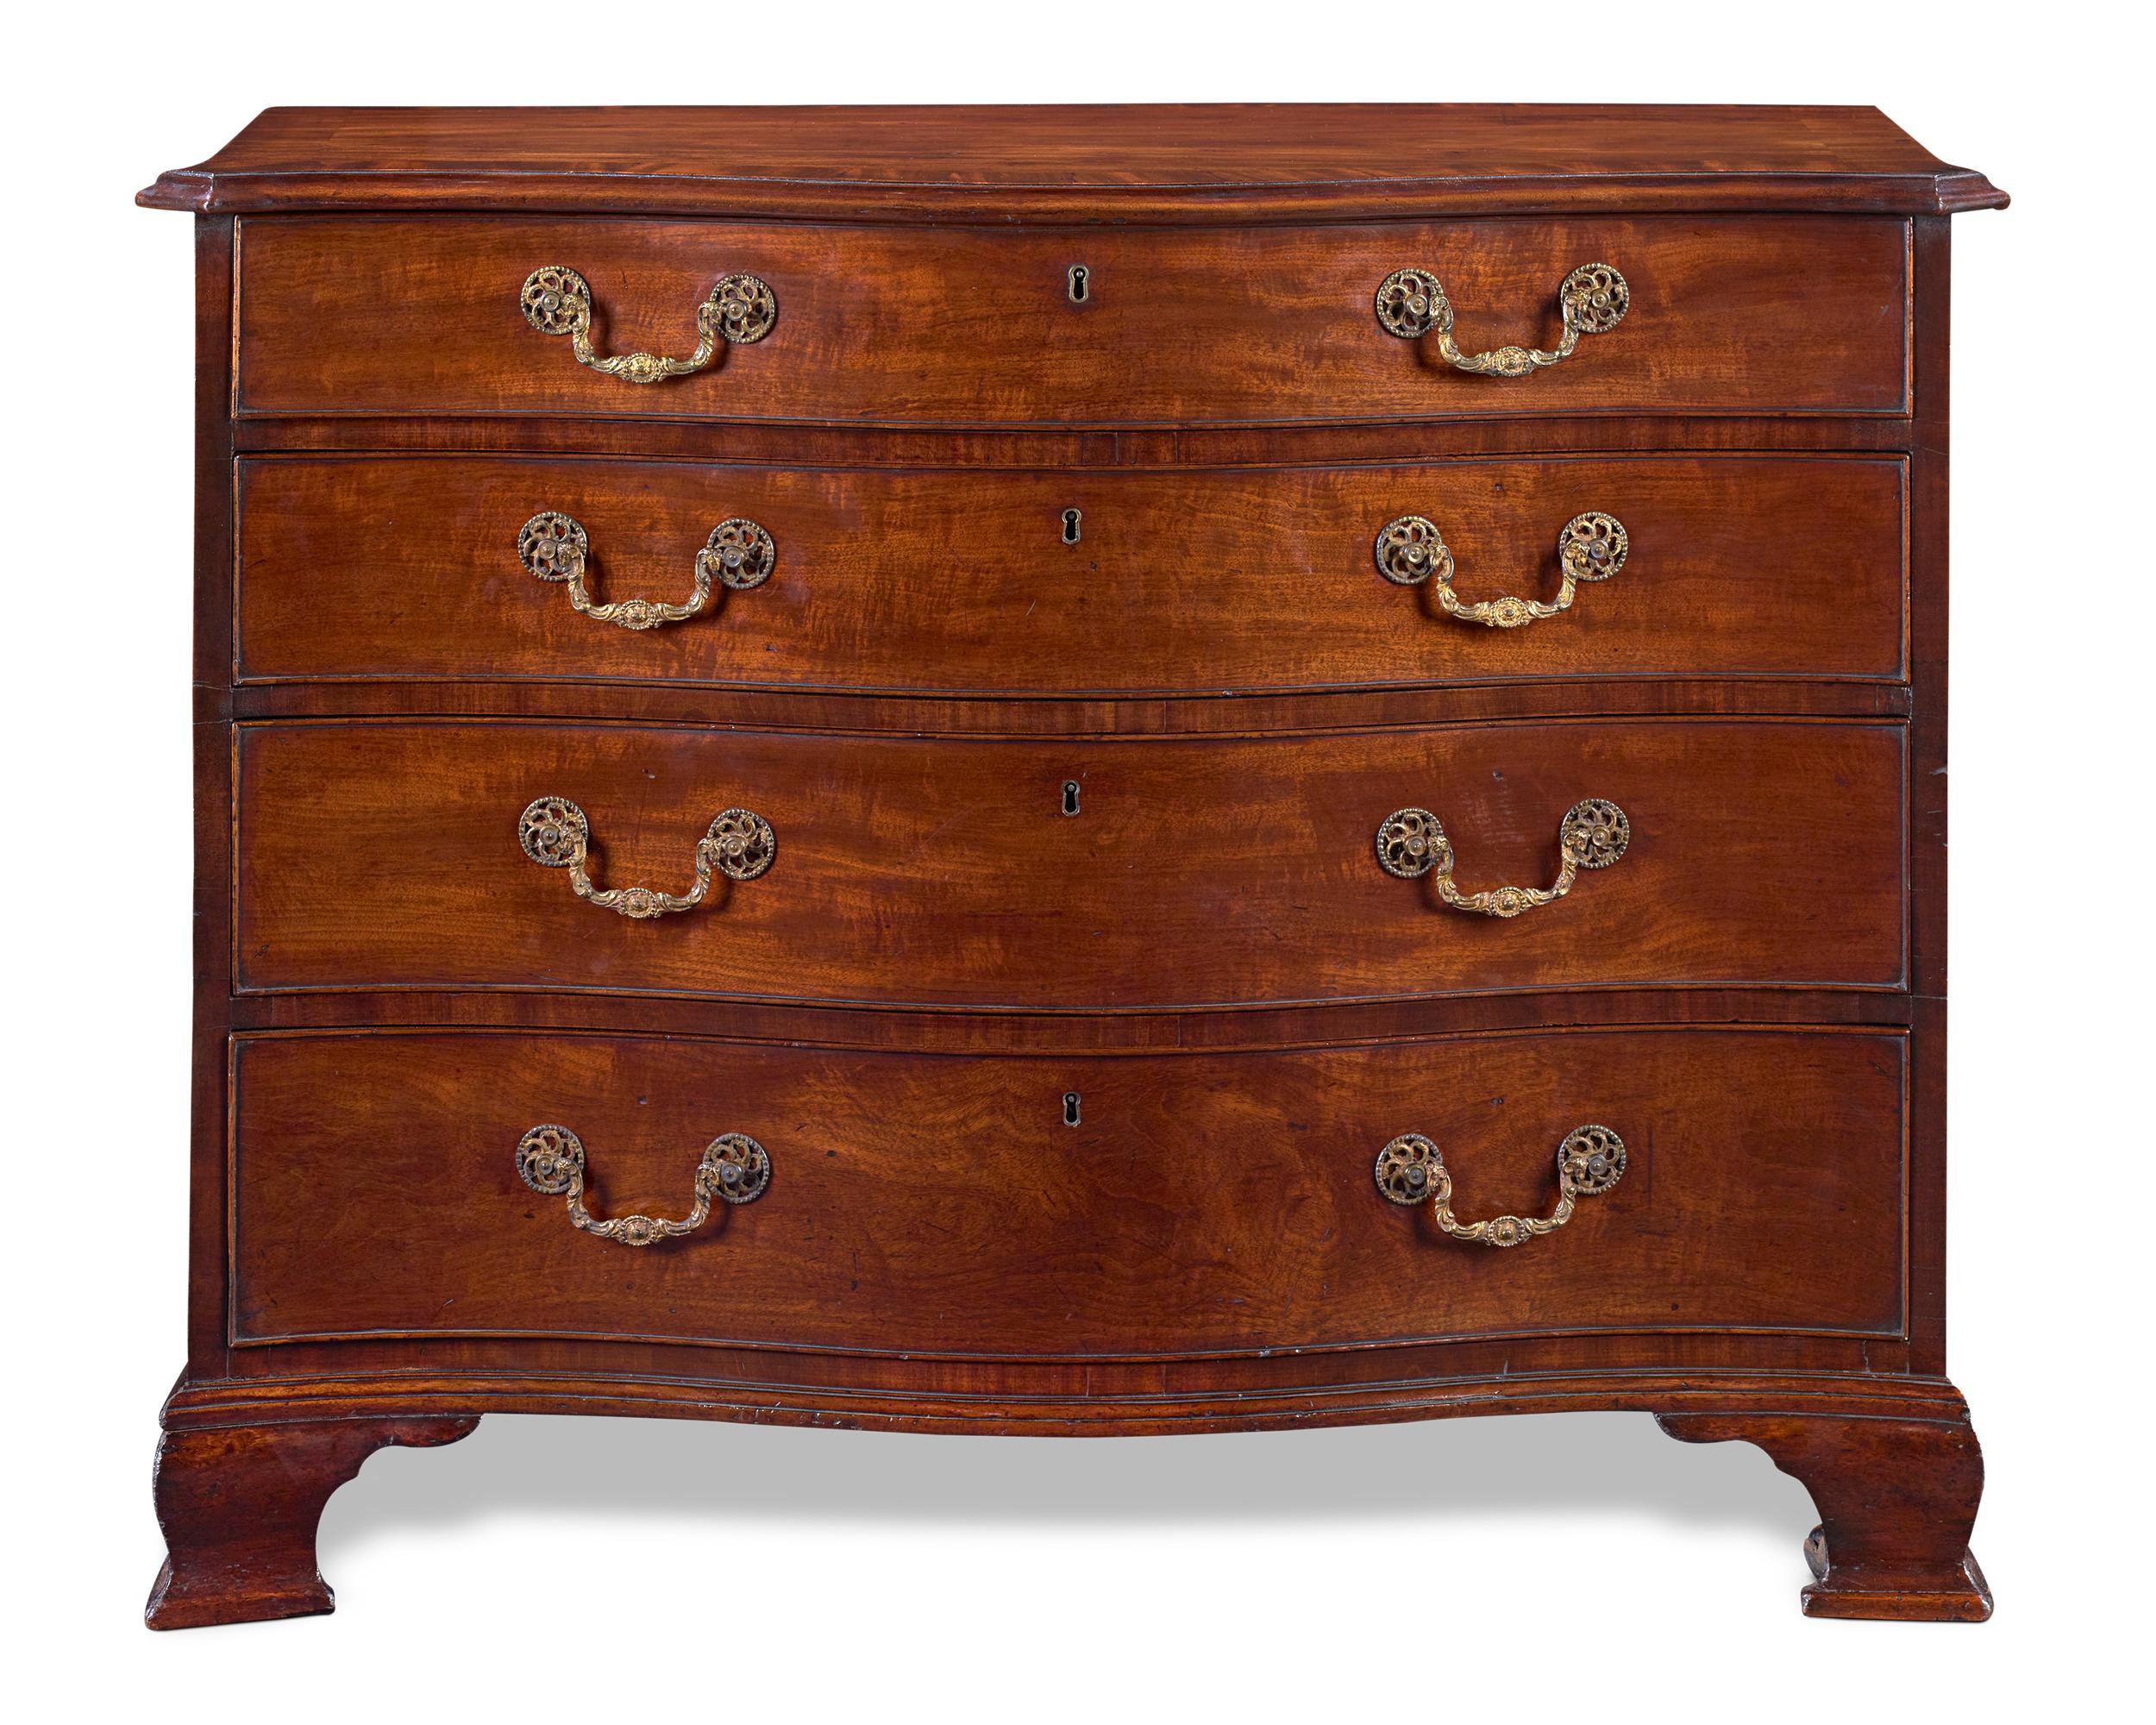 This incredibly rare serpentine-front chest of drawers is attributed to the iconic Thomas Chippendale and is counted as one of the few examples in existence made by his hand. An unquestionable masterpiece, this mahogany dresser is complete with its